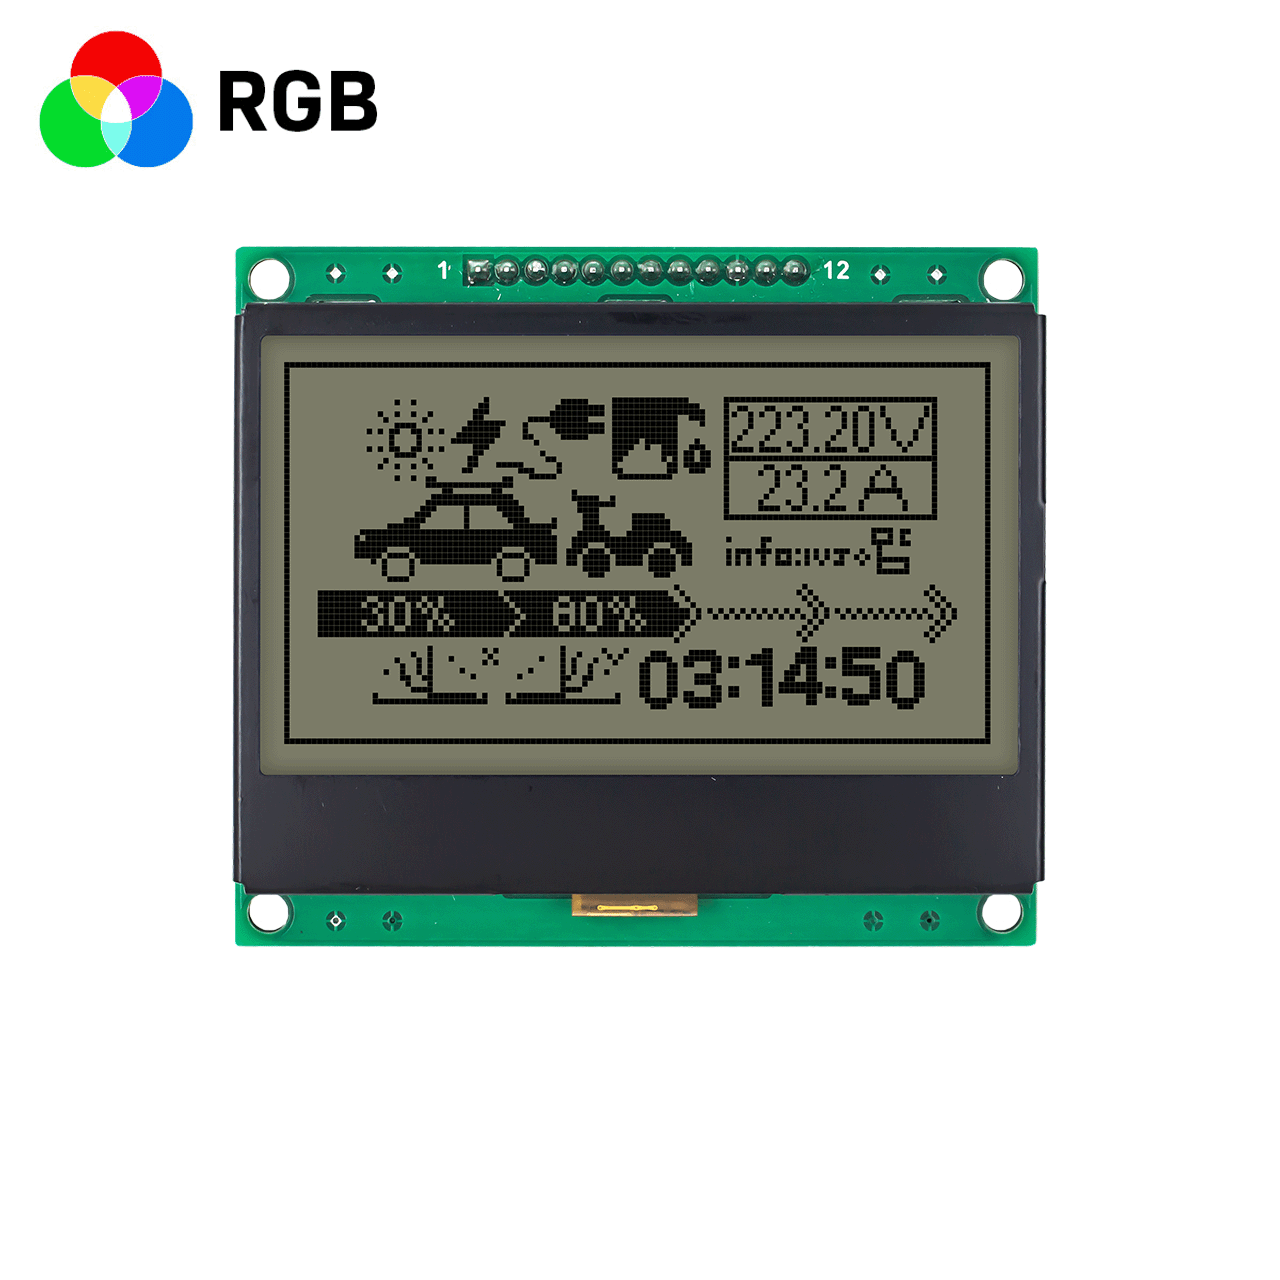 128x64 Graphic LCD Display Module | 3 Inch Graphic LCD Display Module | 128x64 Graphic LCD Module | 3.3V | FSTN +RGB Red Green Blue Backlight | Adruino